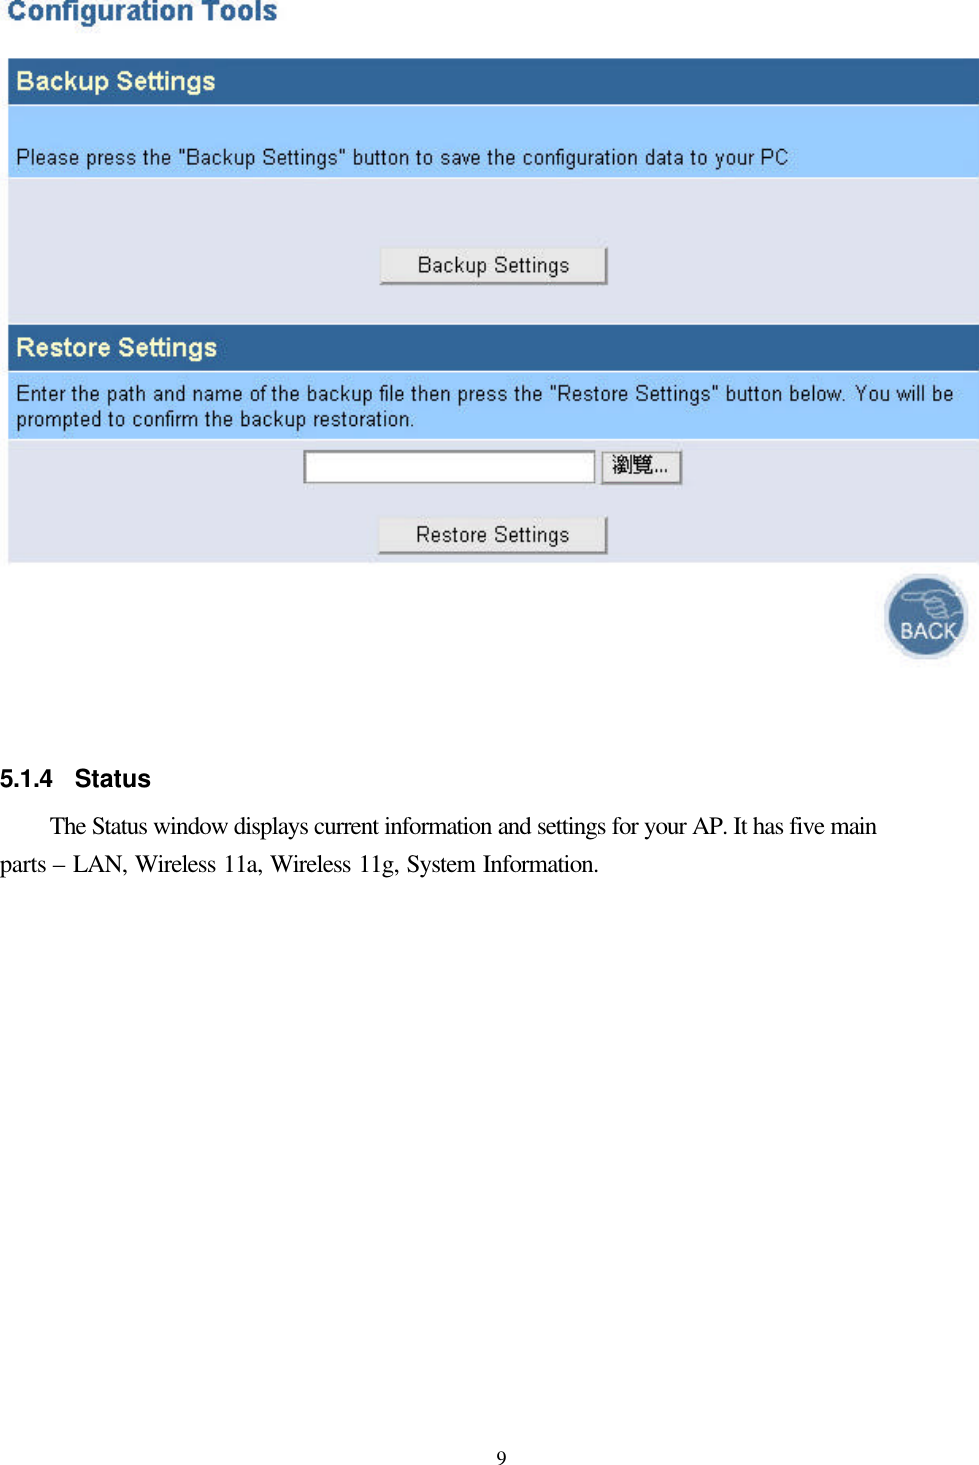  9 5.1.4 Status The Status window displays current information and settings for your AP. It has five main parts – LAN, Wireless 11a, Wireless 11g, System Information.   